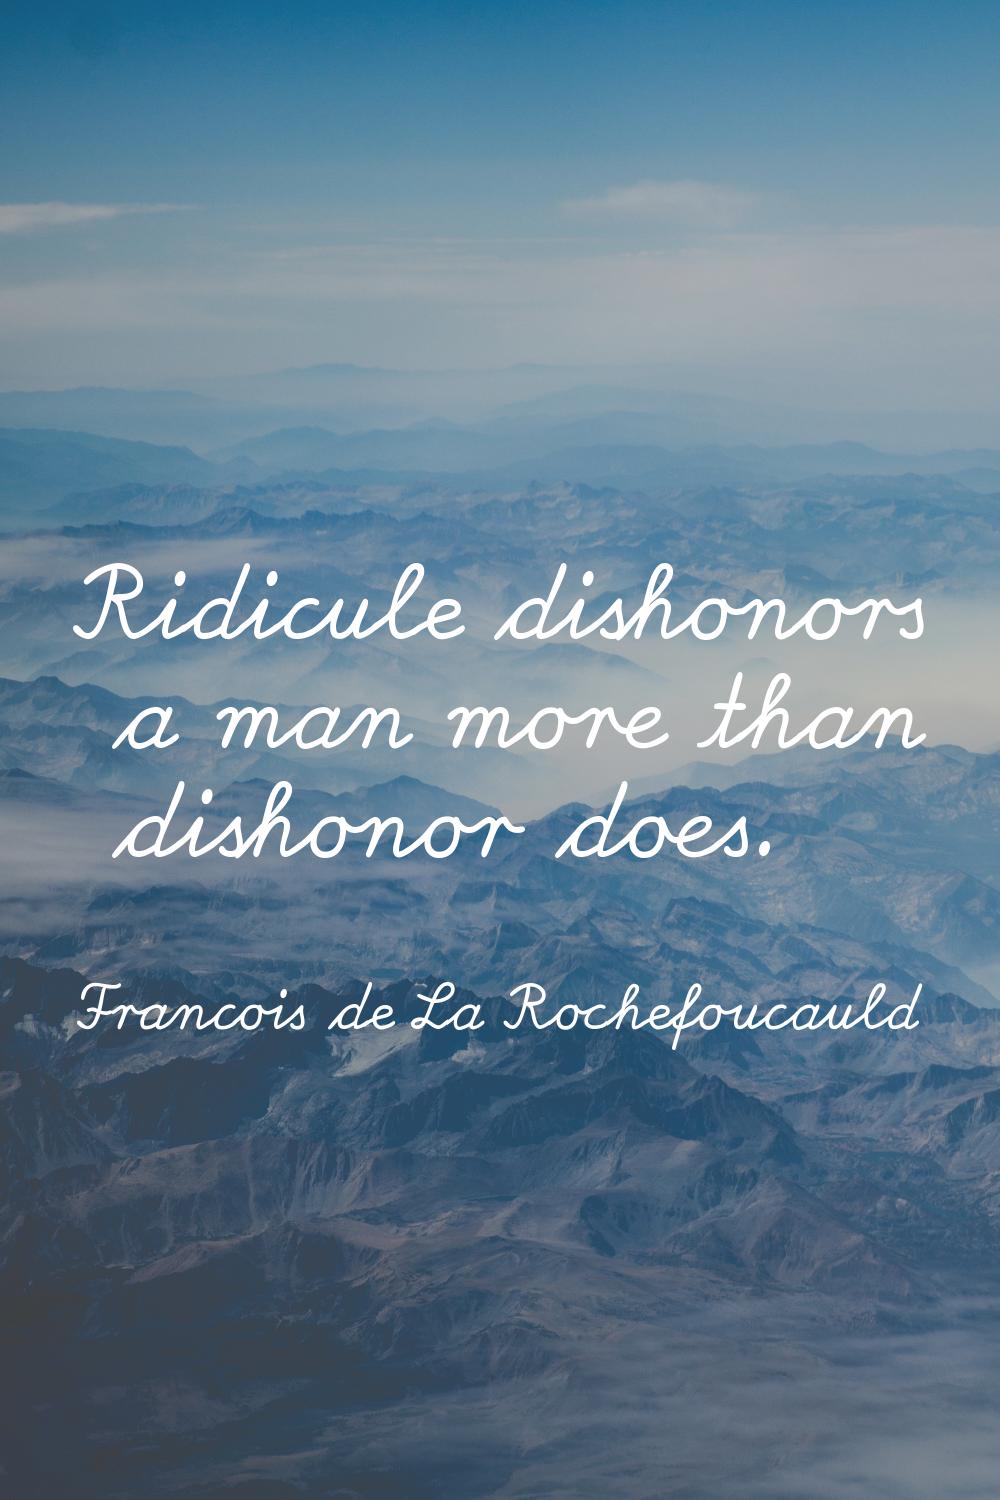 Ridicule dishonors a man more than dishonor does.